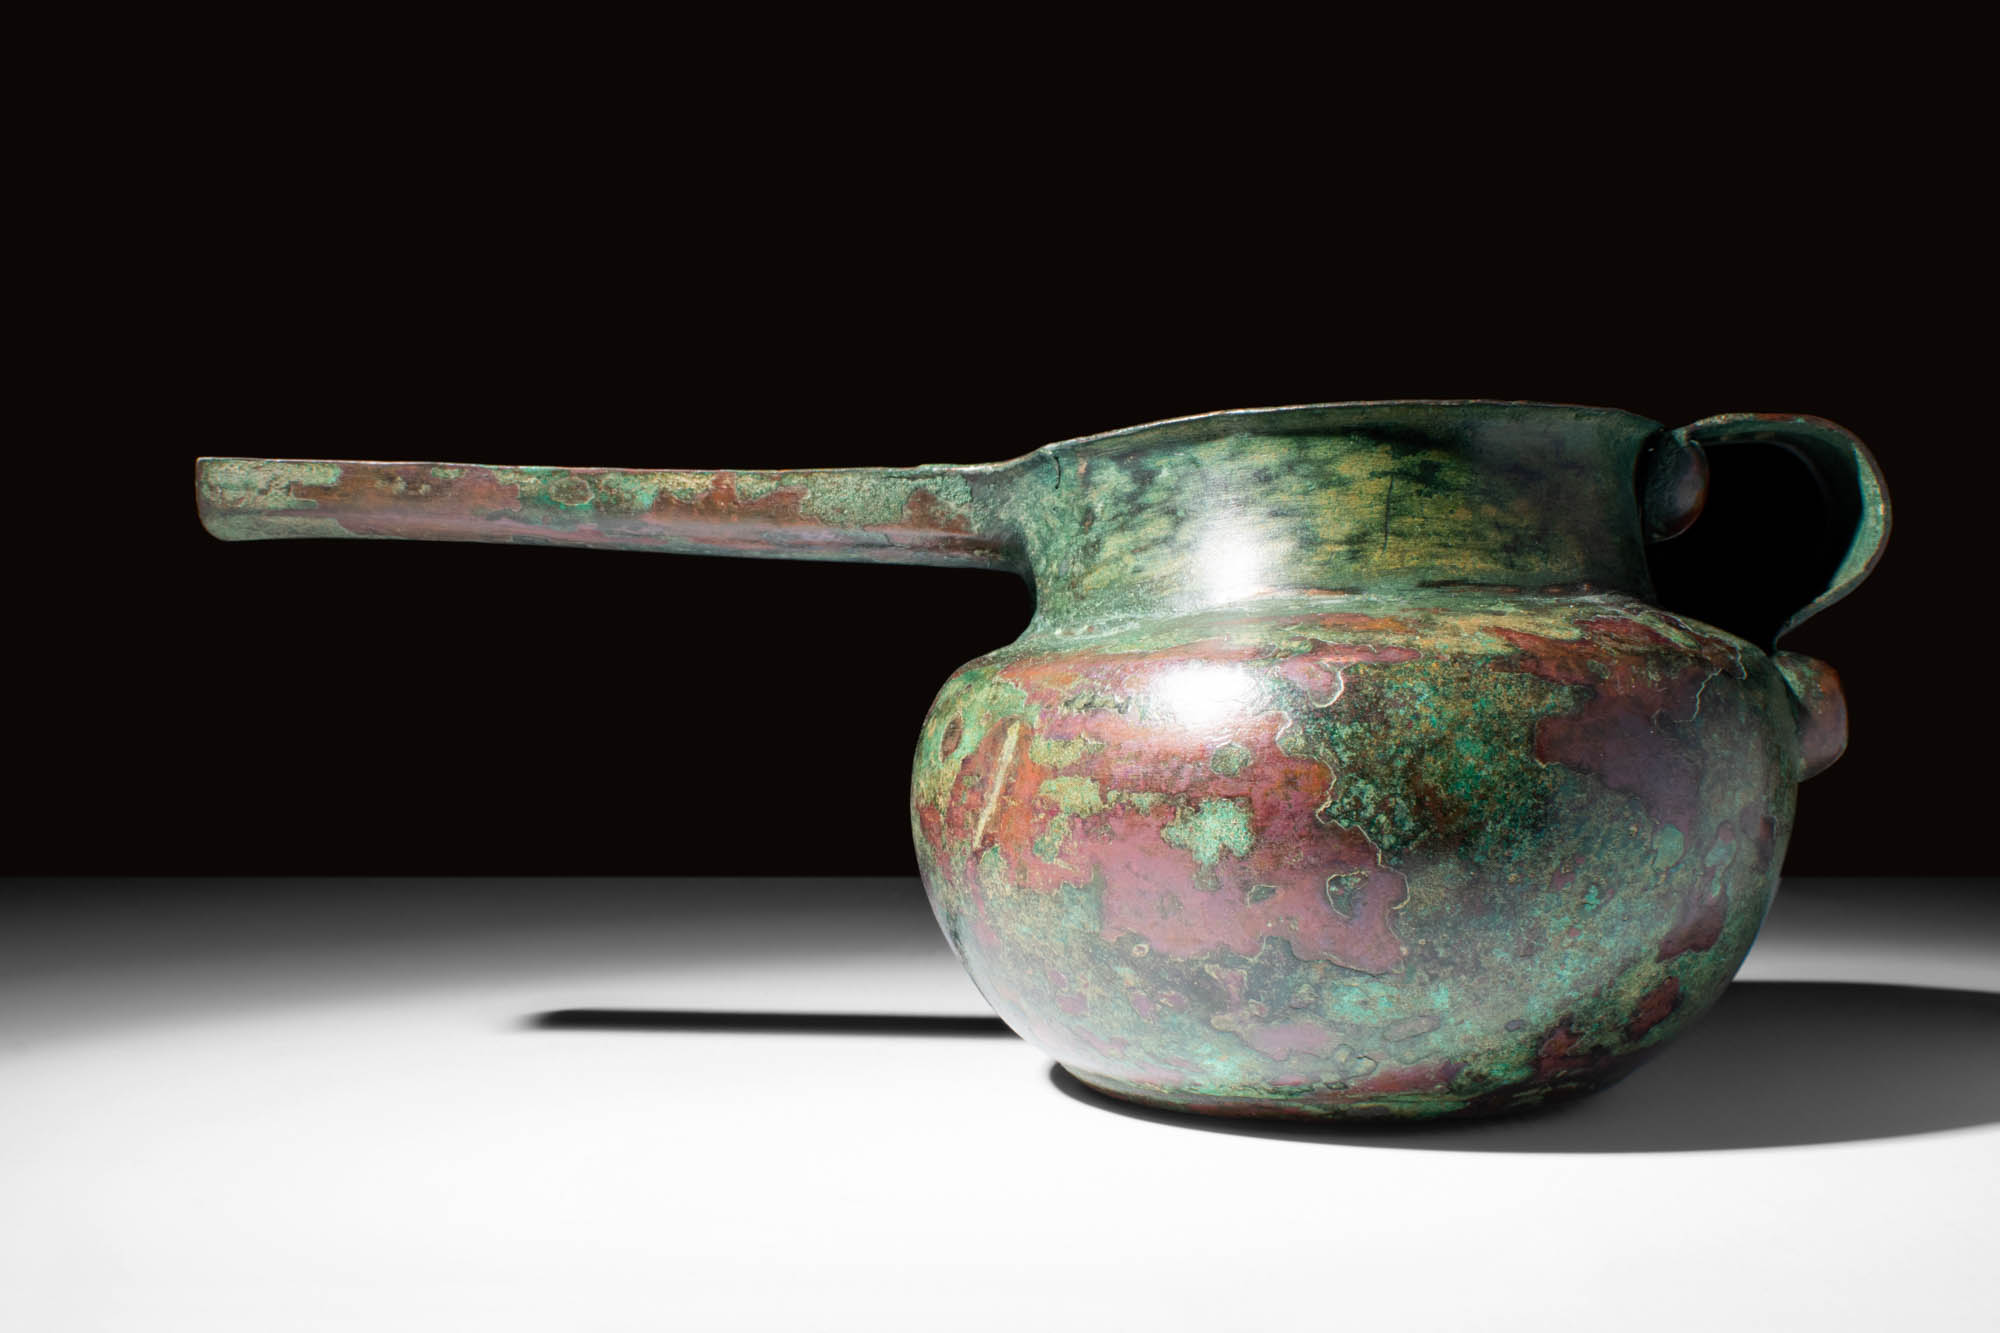 AMLASH SPOUTED VESSEL DECORATED WITH GLOBES - Image 2 of 6